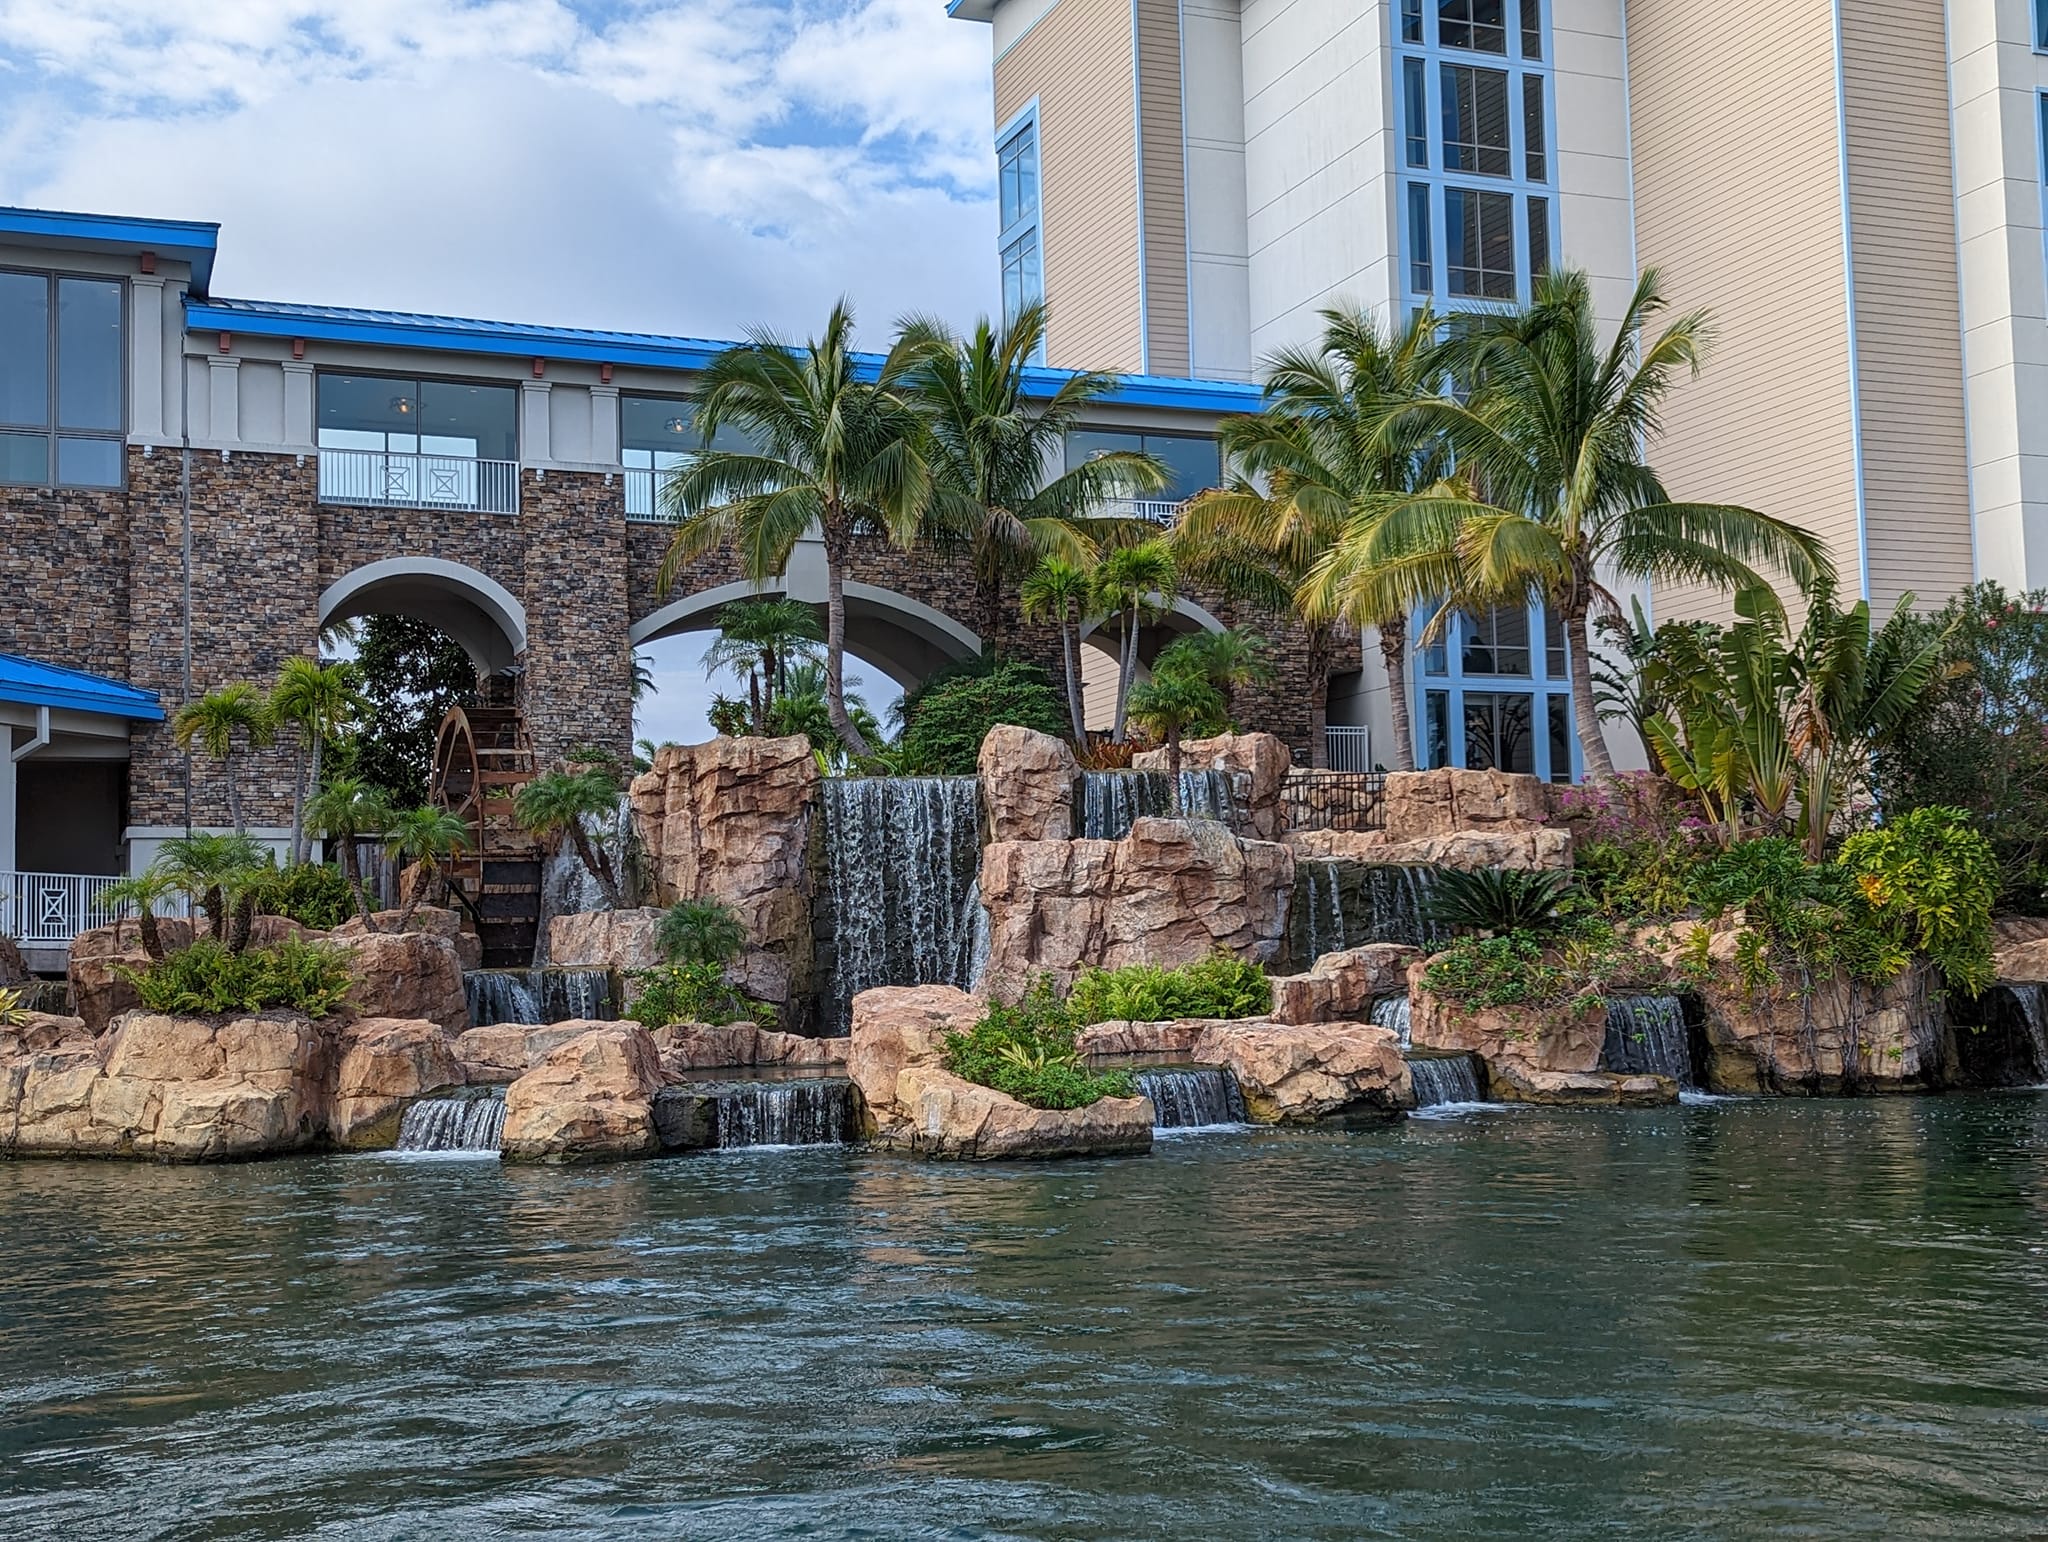 This is a look at Sapphire falls from the boat shuttle